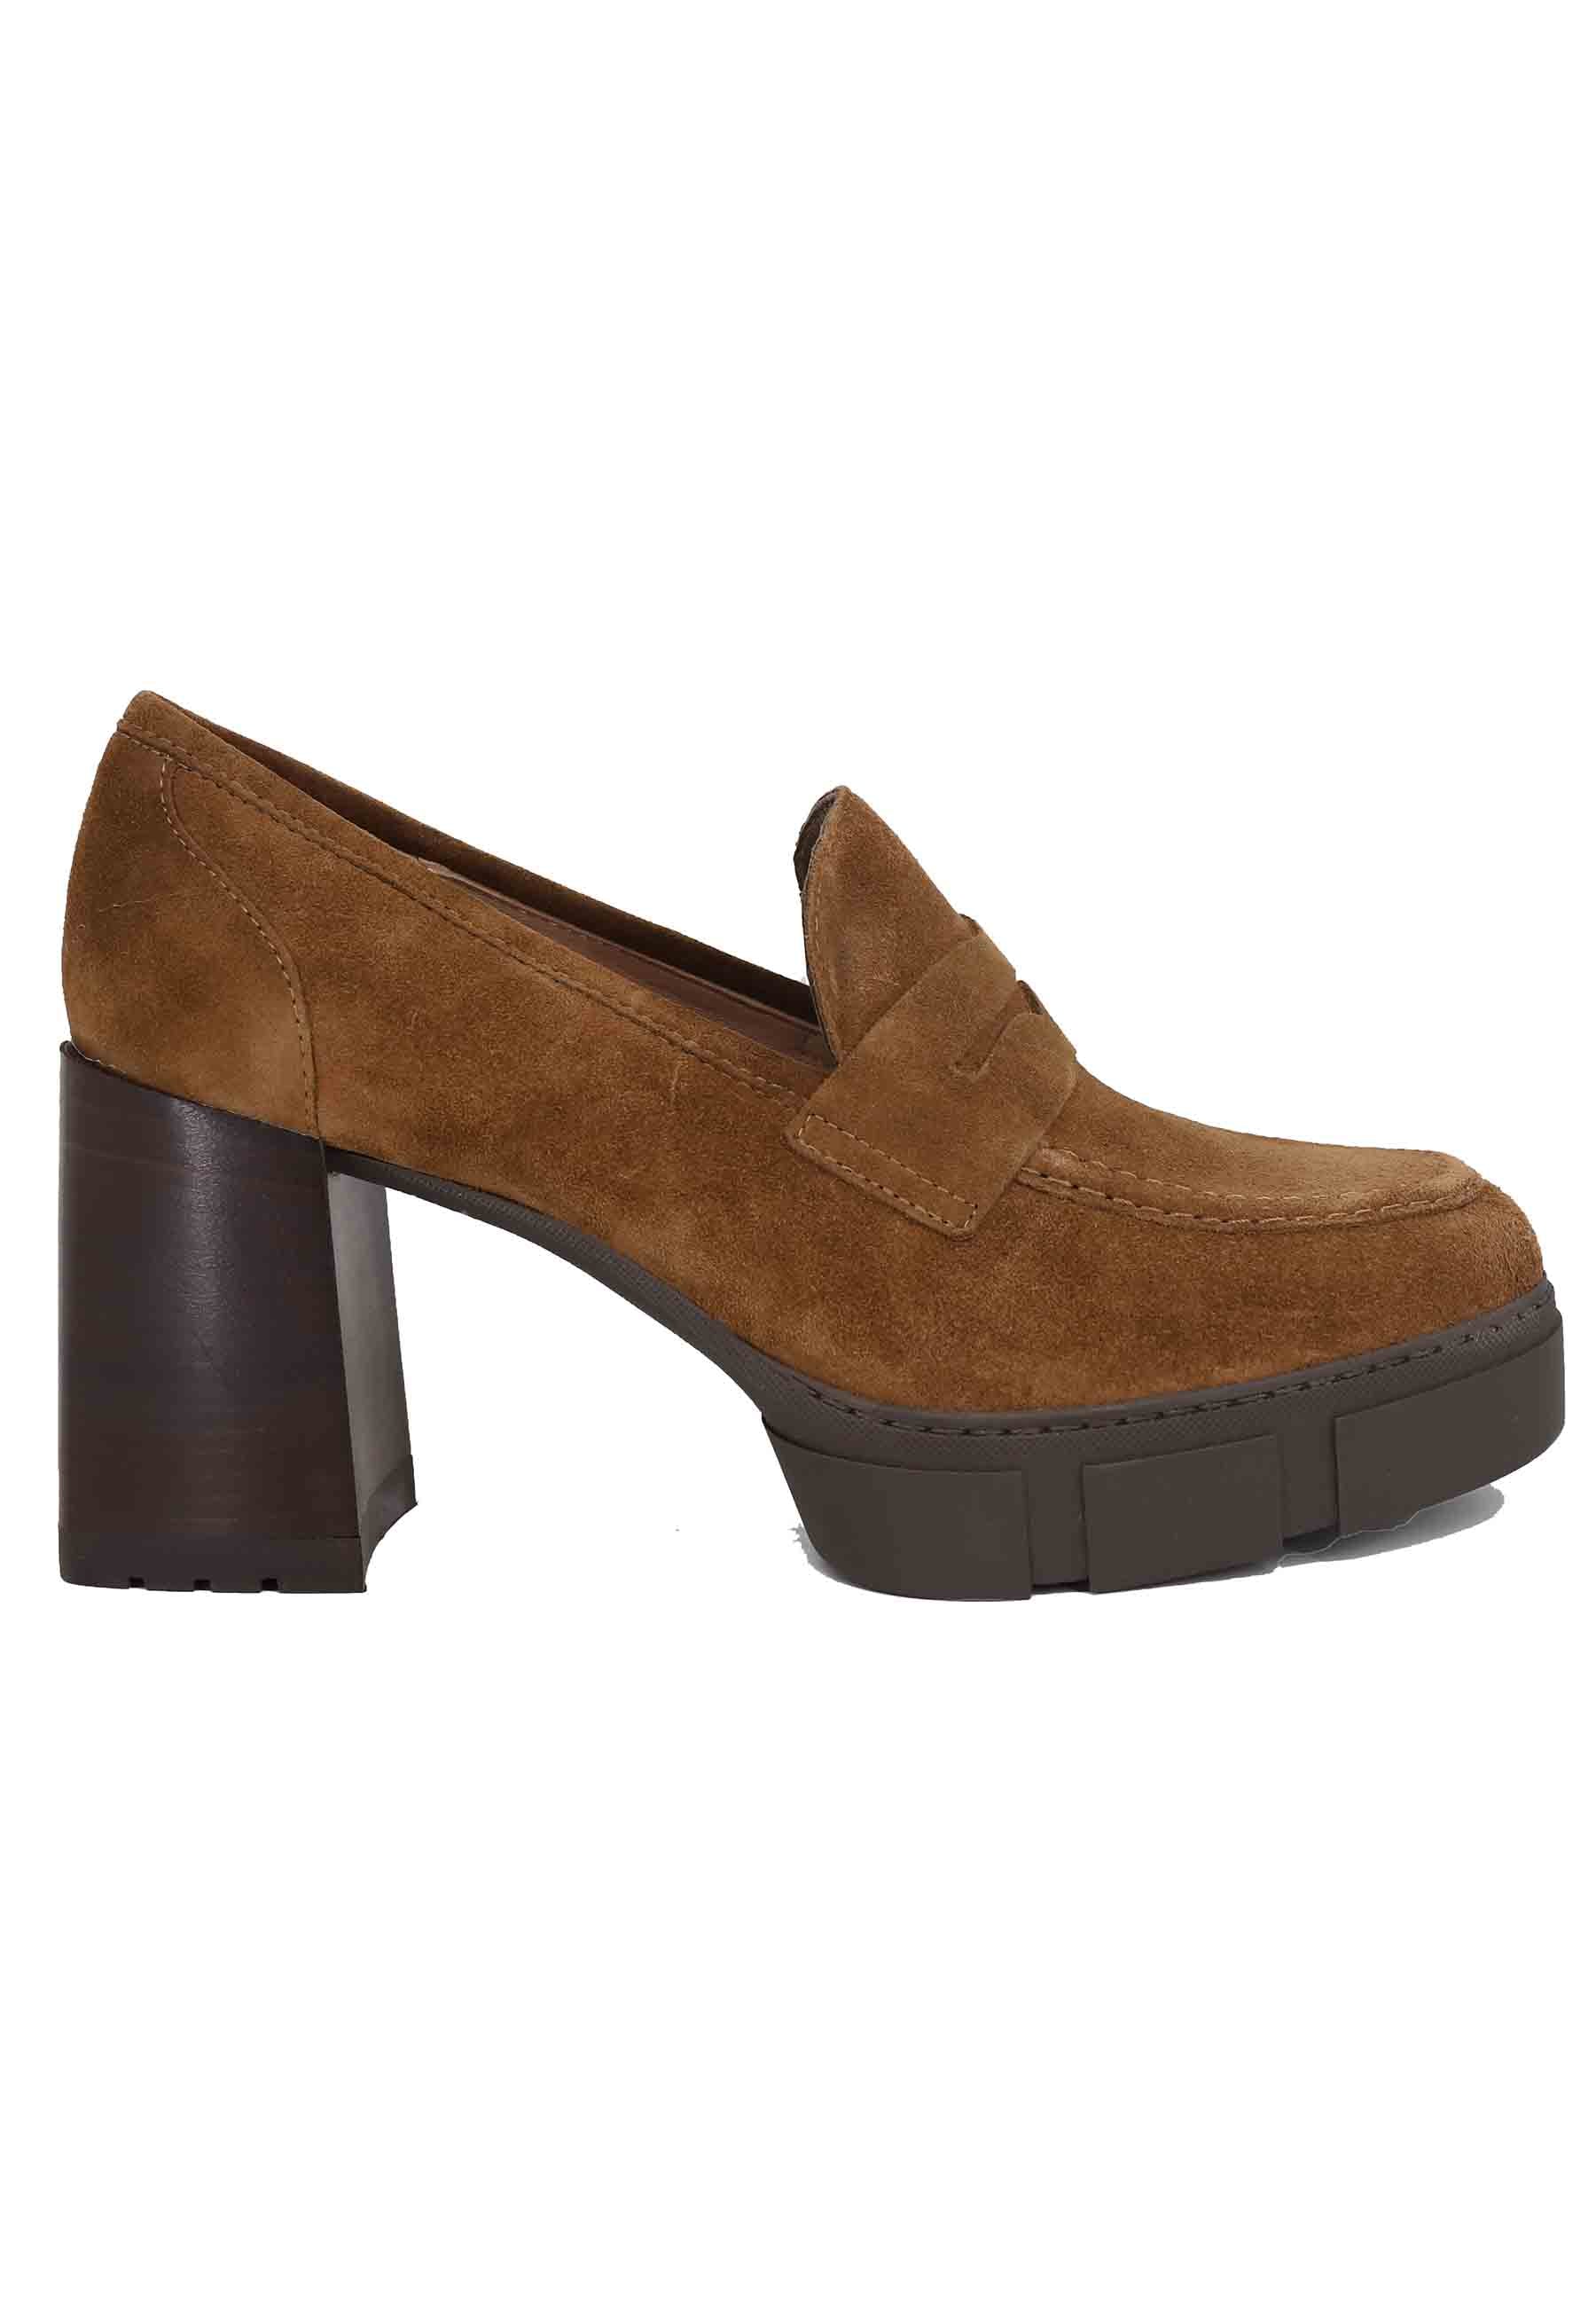 Women's moccasins in leather suede with high heel and plateau